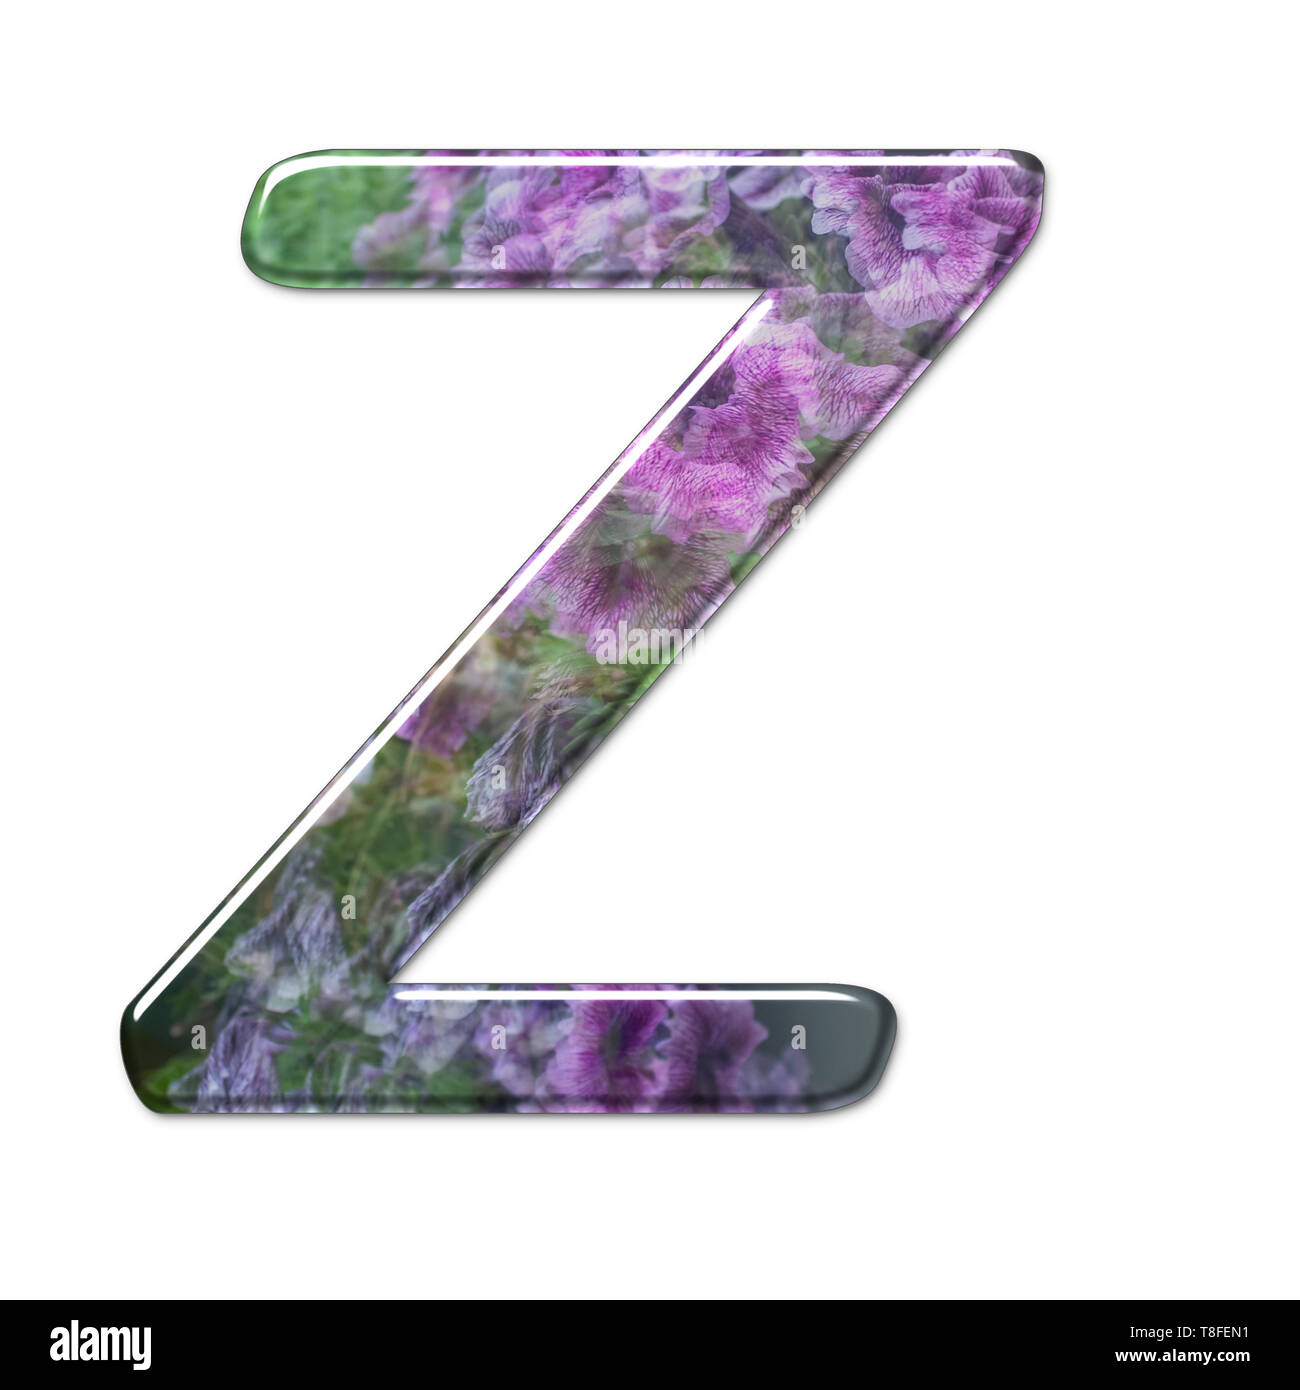 The Capitol Letter Z Part of a set of letters, Numbers and symbols of 3D Alphabet made with a floral image on white background Stock Photo